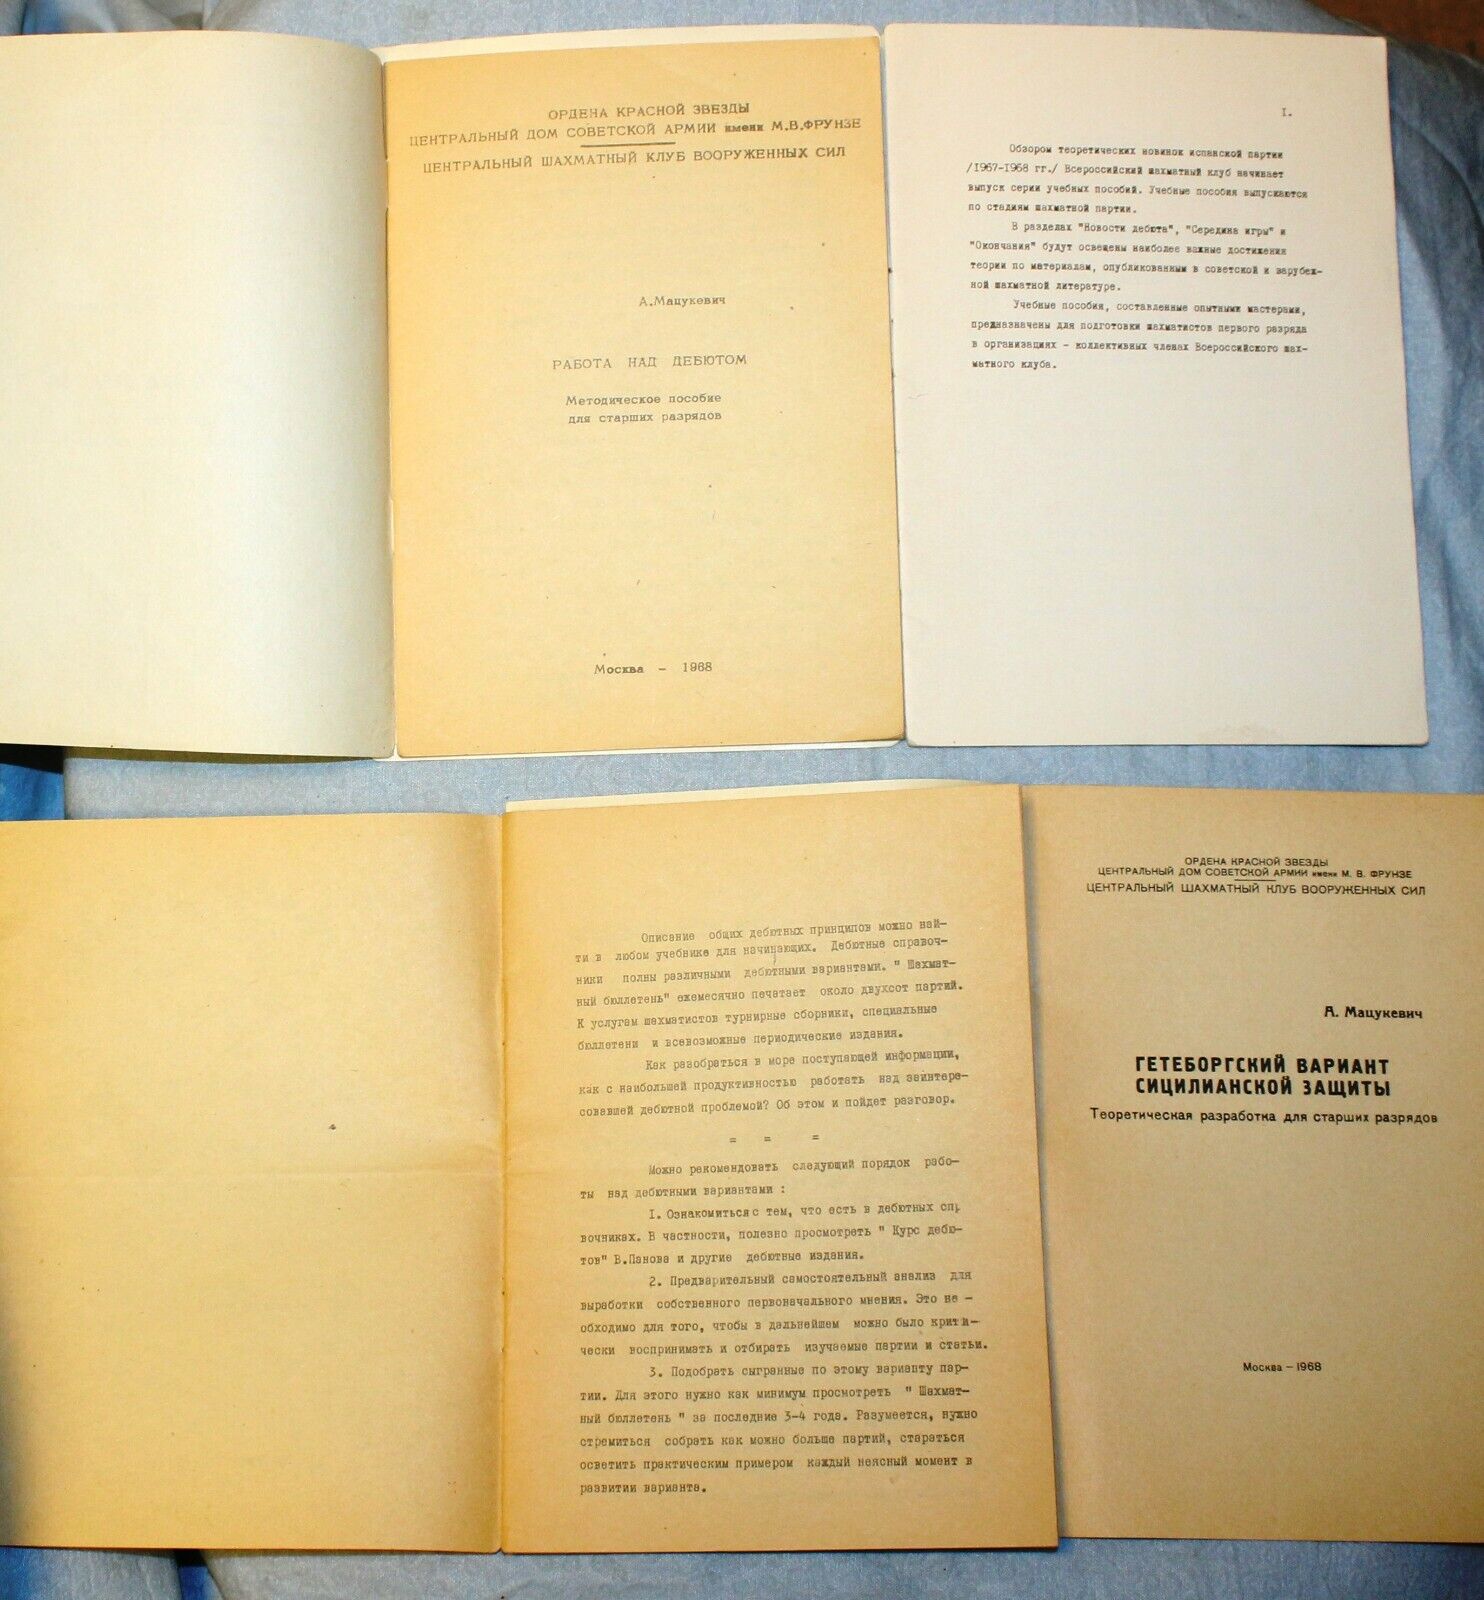 10736.4 Soviet Chess Books in Russian by Matsukevich Moscow, 1968